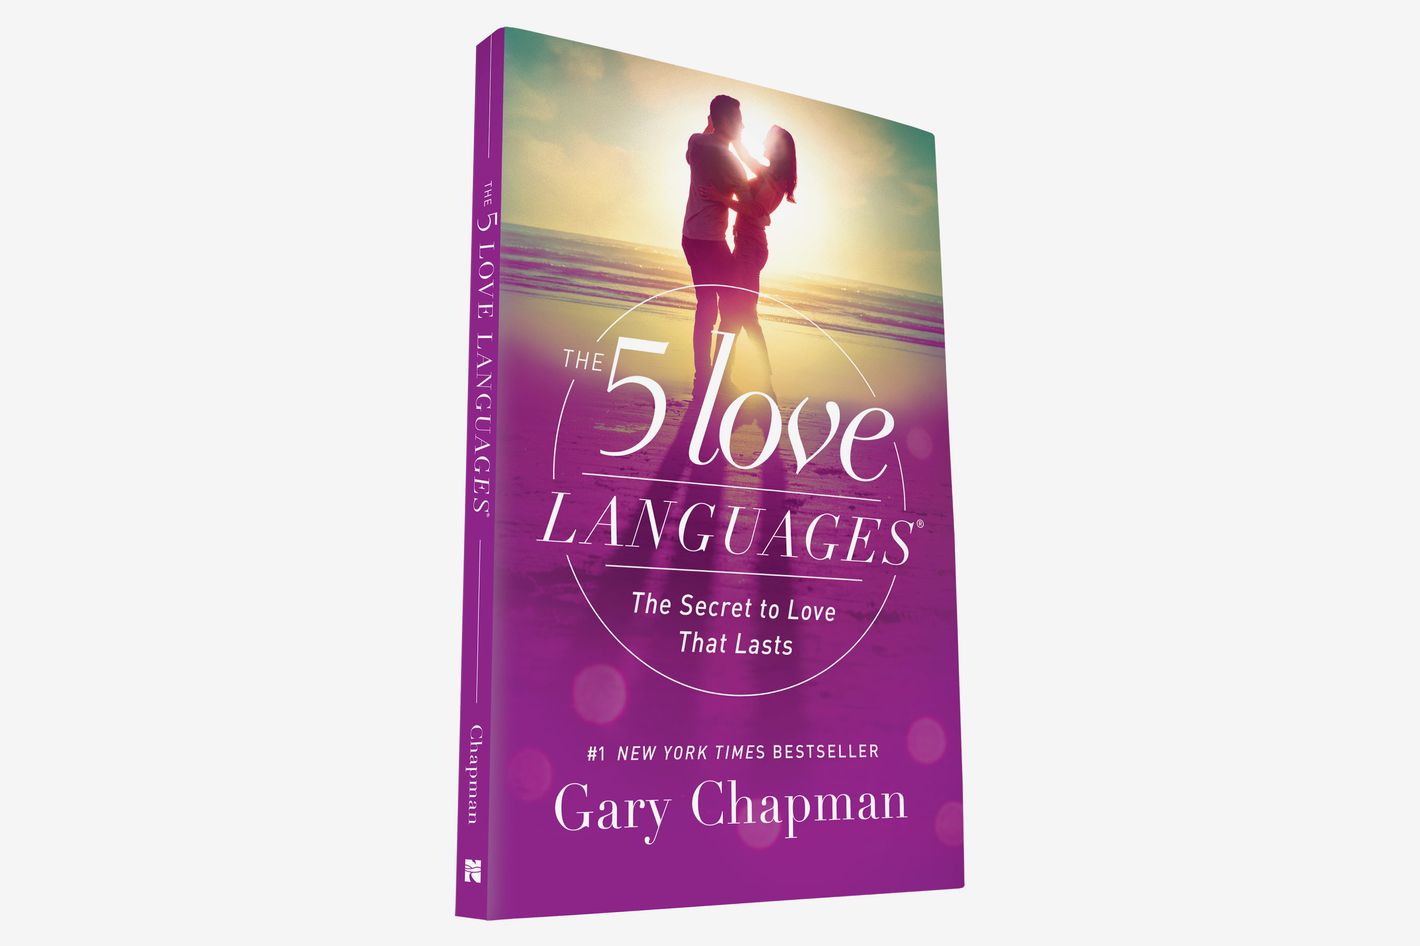 Лов пять. 5 Love languages by Gary Chapman. 5 Languages of Love. The 5 Love languages: the Secret to Love that lasts. 5 Love languages book.